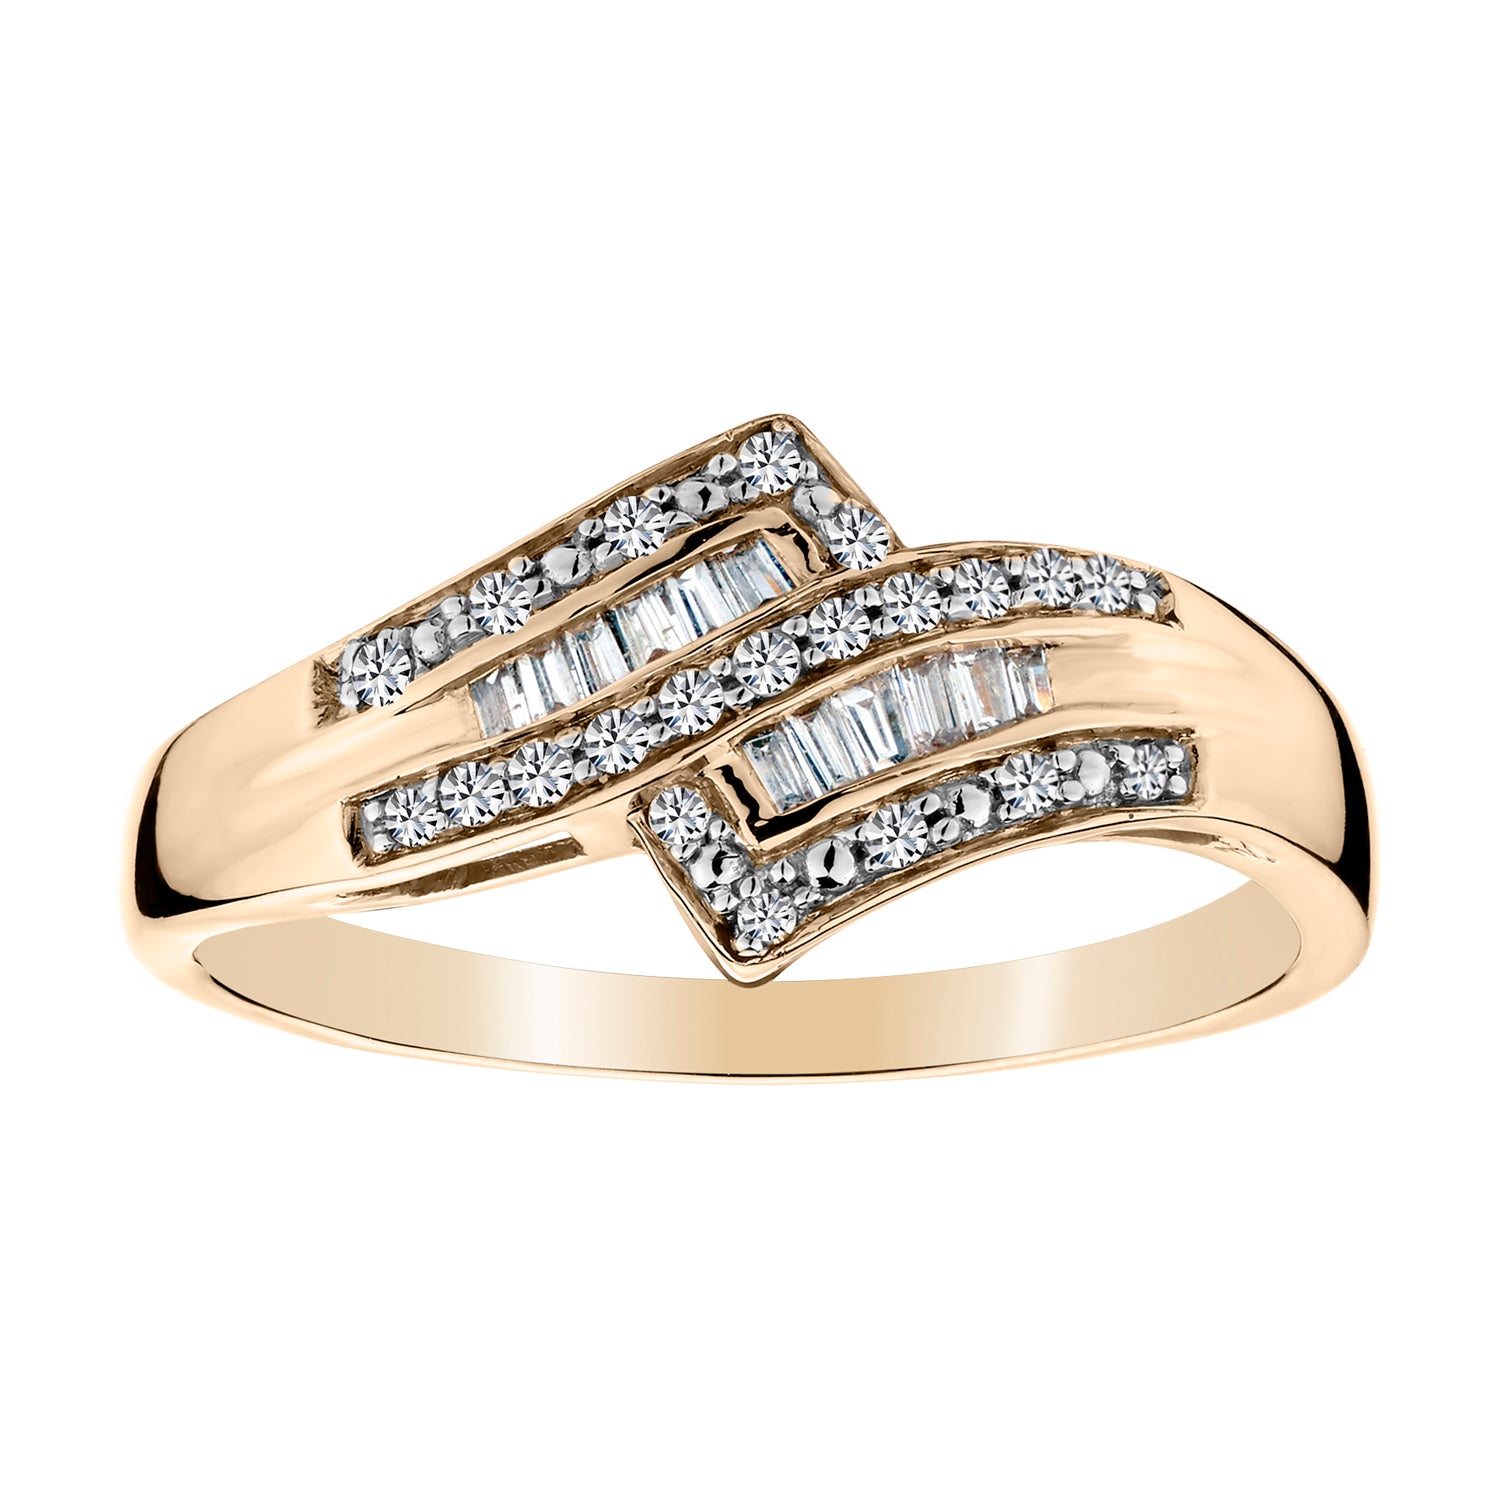 .16 Carat Diamond Ring,  10kt Yellow Gold. Fashion Rings. Griffin Jewellery Designs